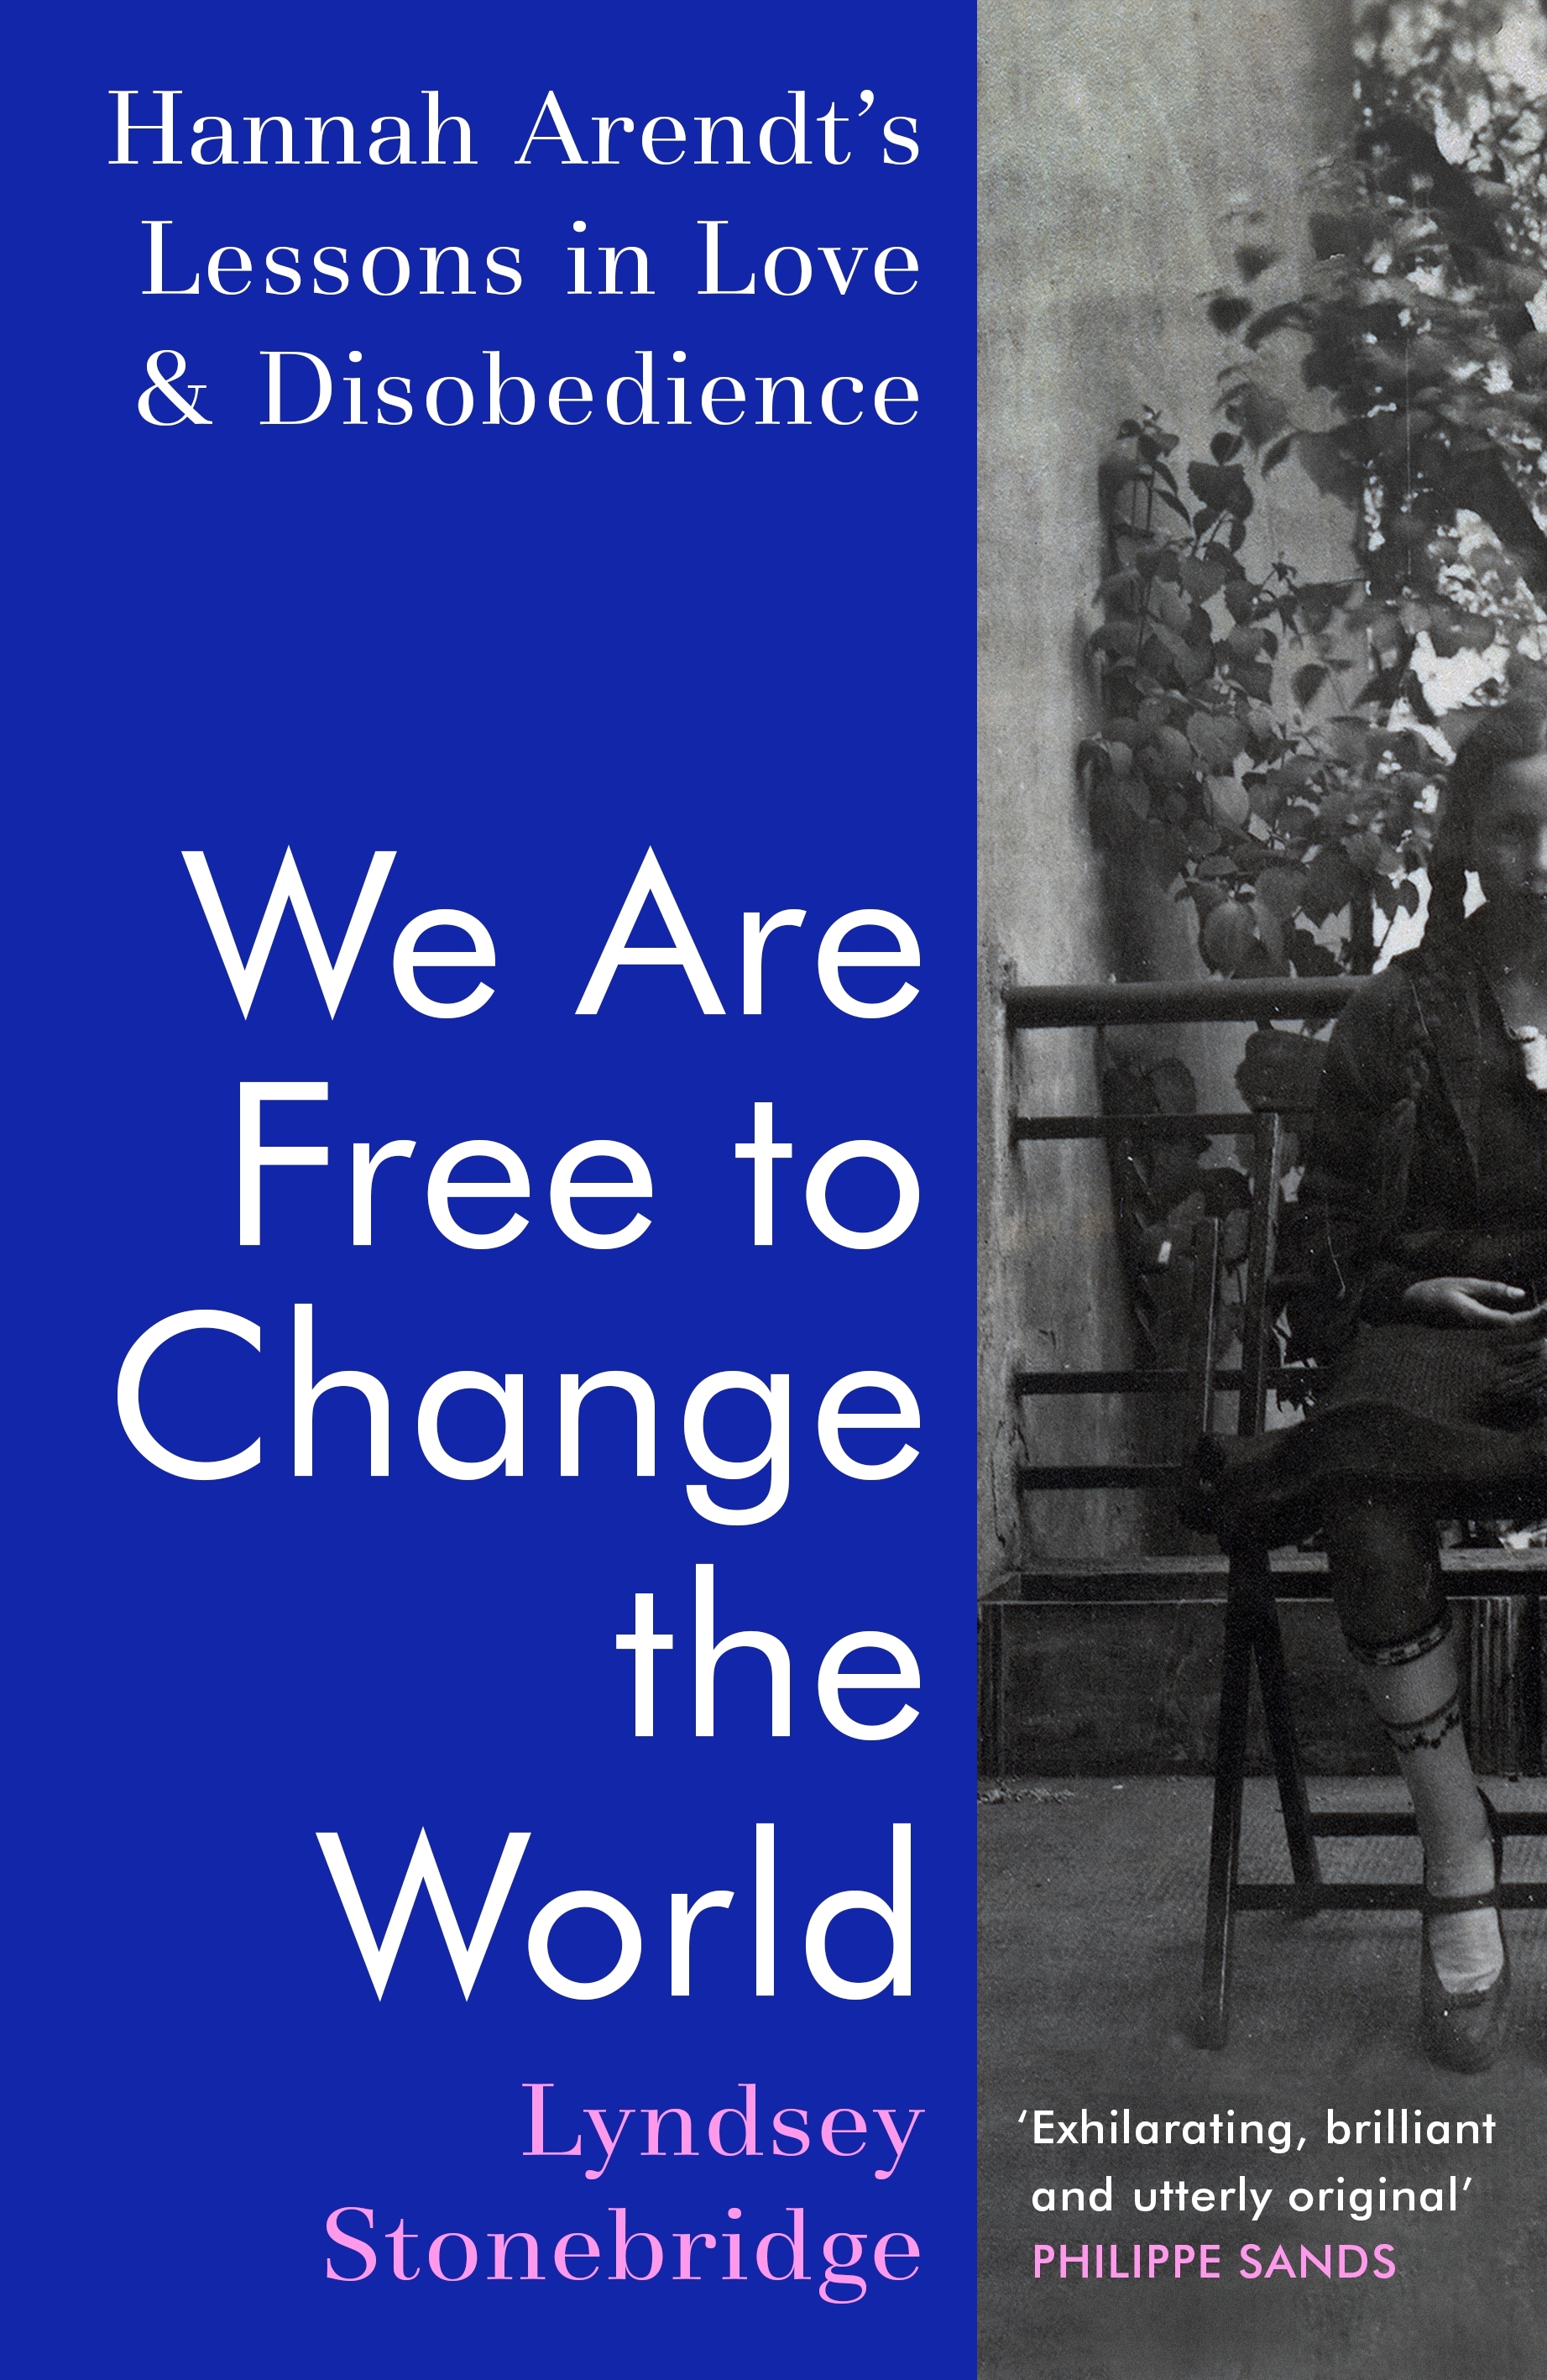 We Are Free to Change the World: Hannah Arendt's lessons in love and disobedience